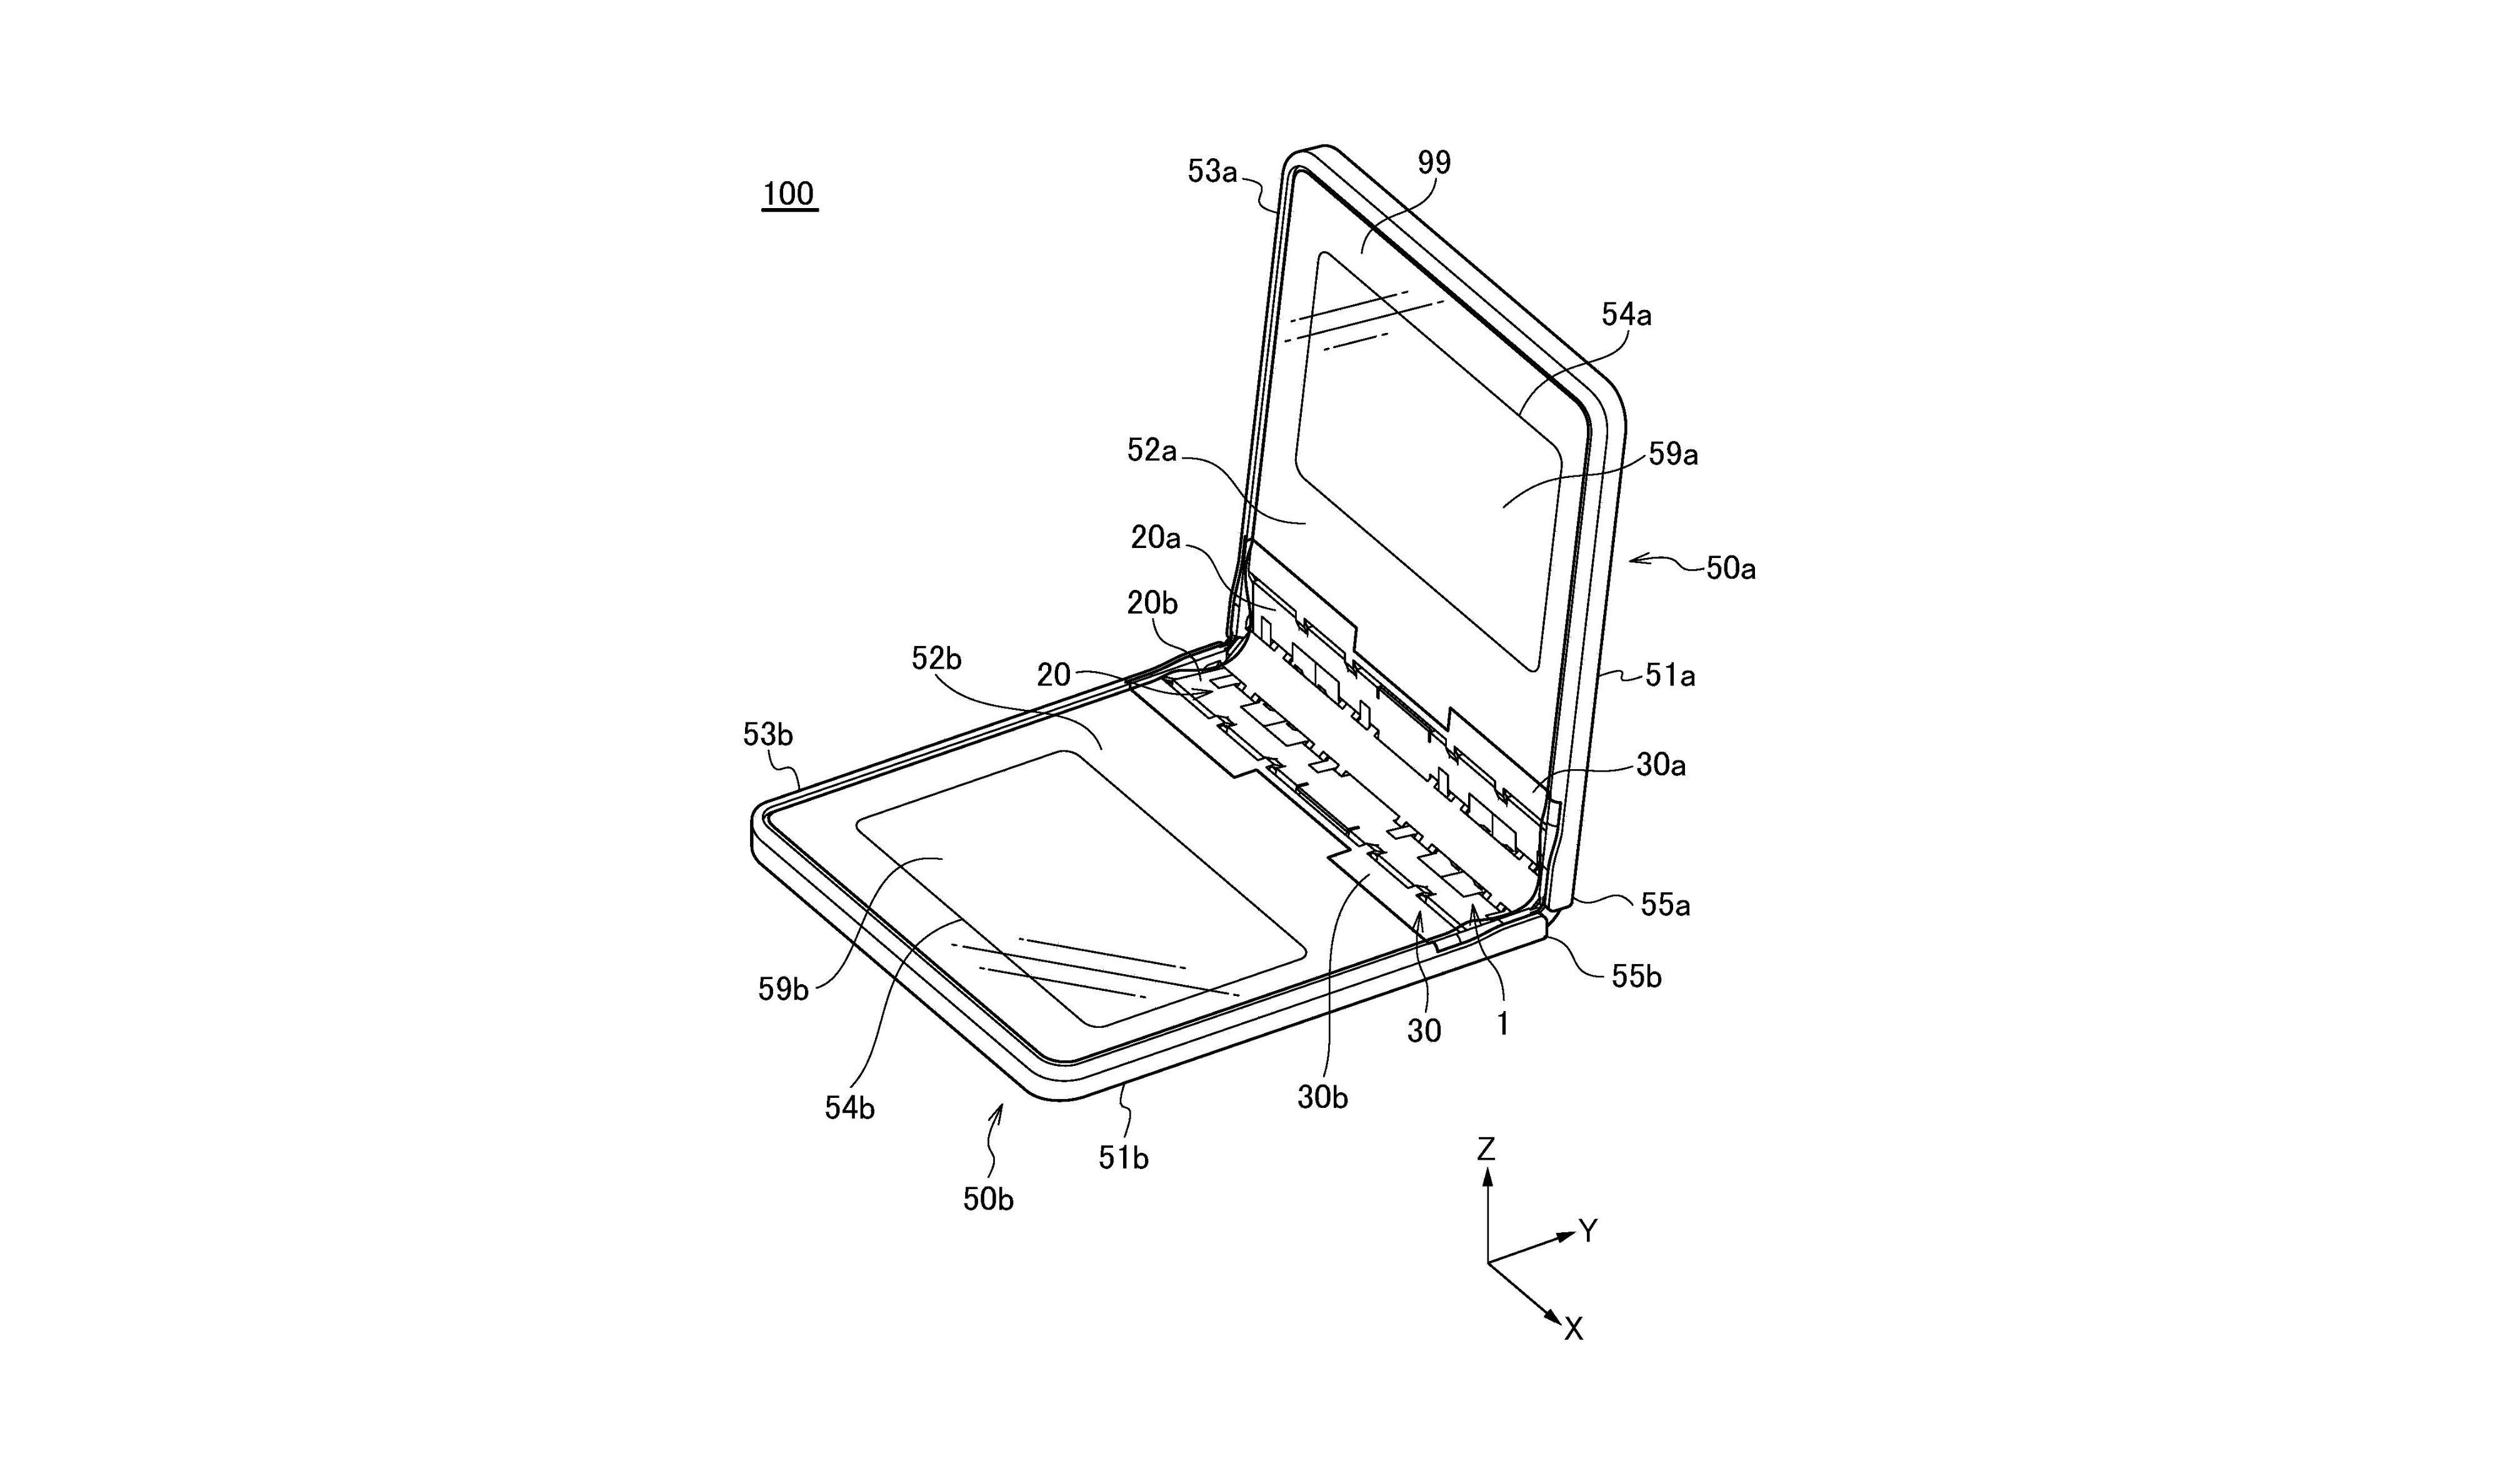 Huawei Complex Hinge Design Patent Crease-Free Foldable Smartphone Featured